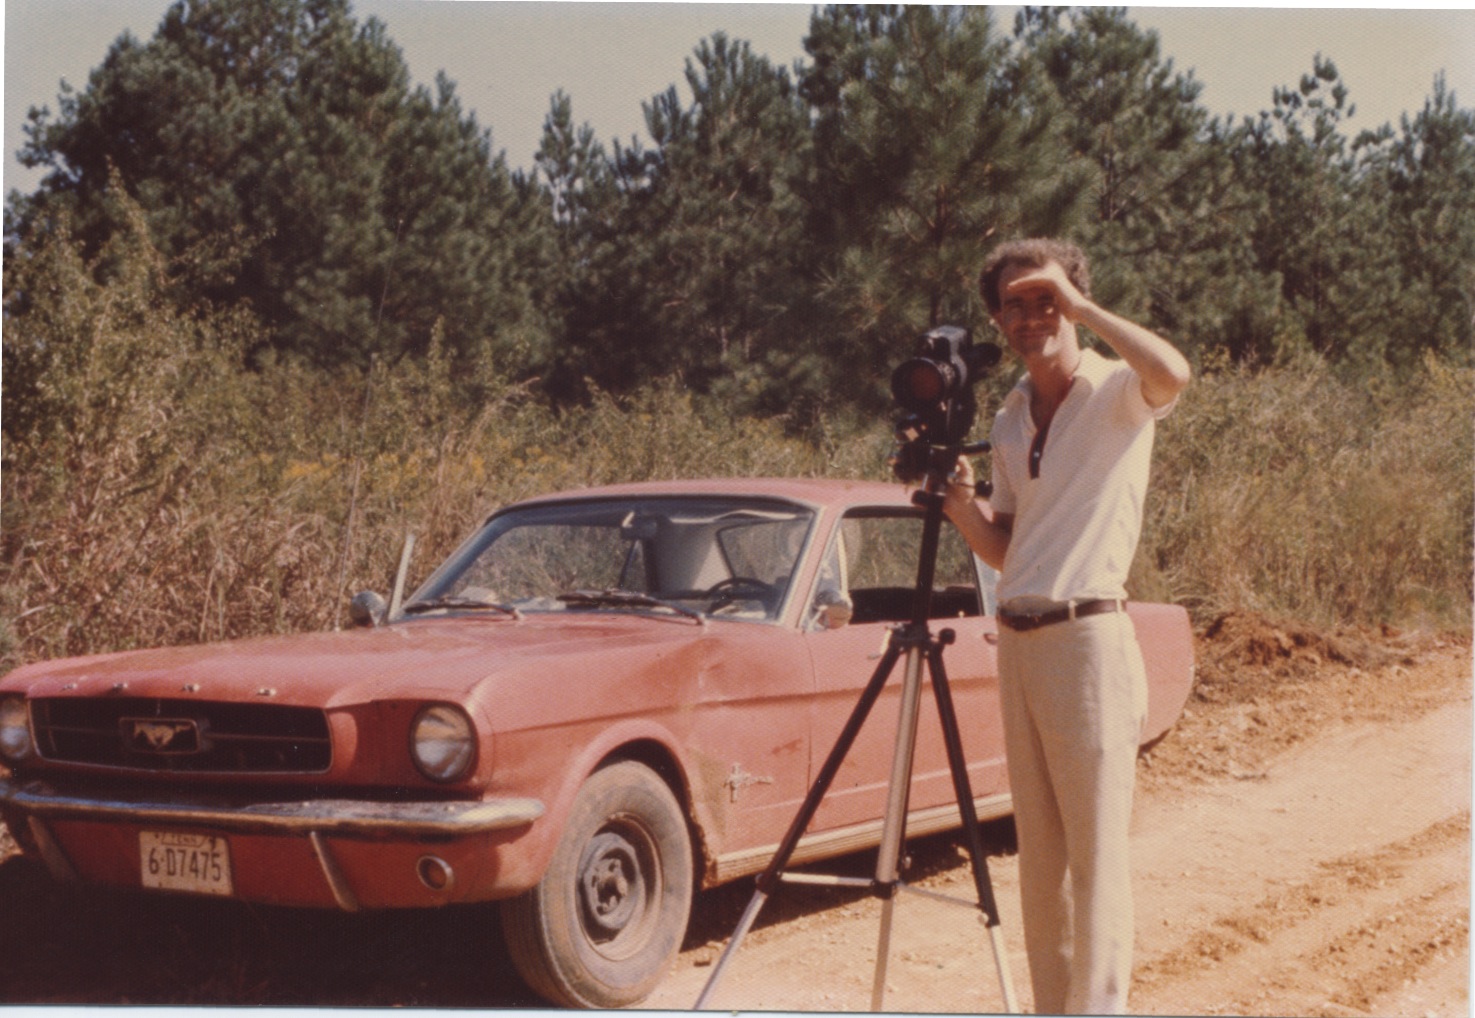 Director Ross Spears filming AGEE in Hale County, Alabama, in 1976. Film car in background.